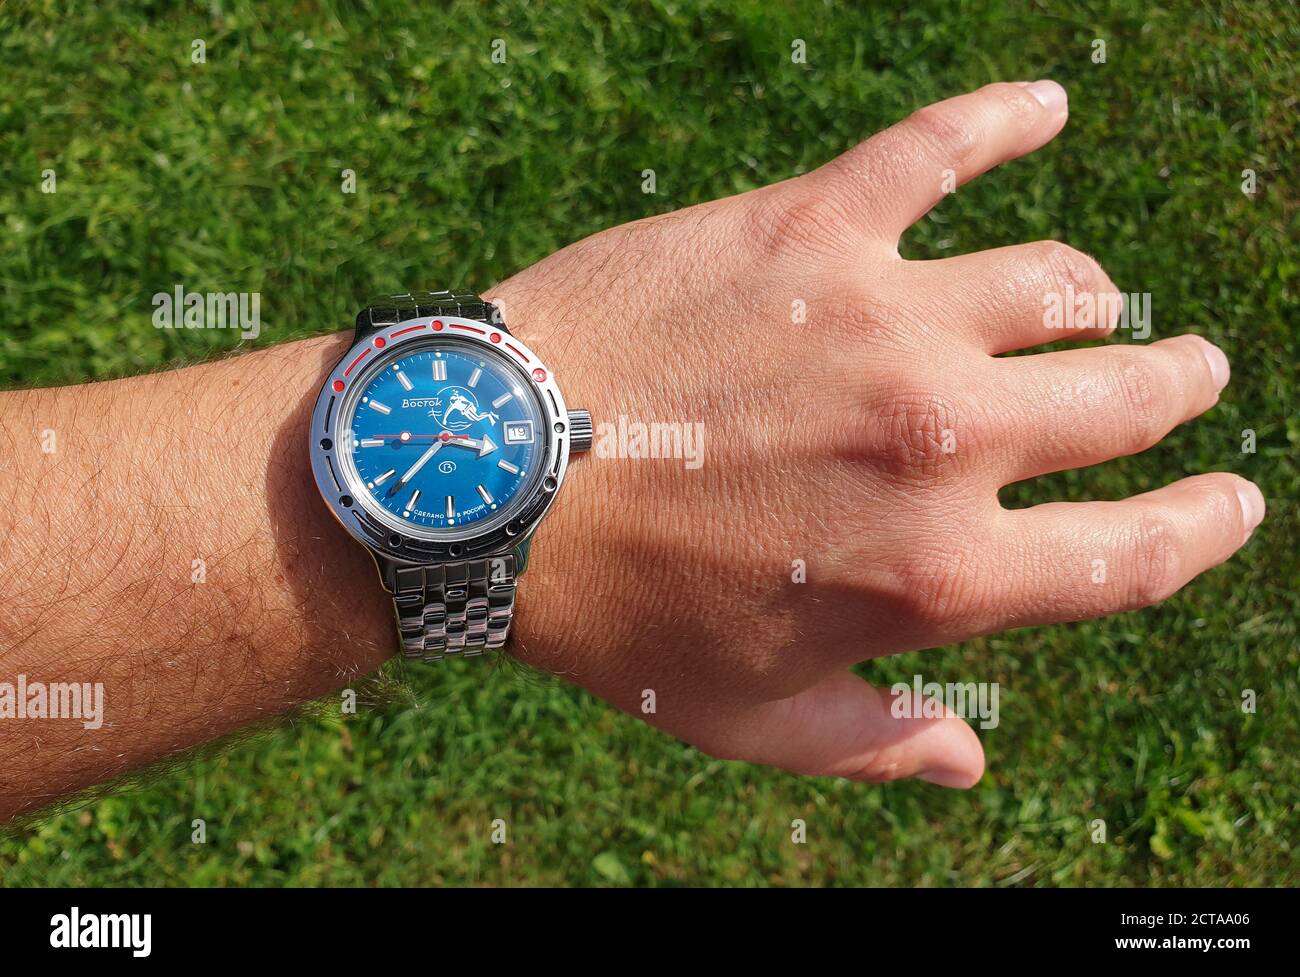 Cluj/Romania - September 19, 2020 - Illustrative editorial: Vintage Vostok  russian automatic underwater watch on hand. Old cold war sovietic era timep  Stock Photo - Alamy